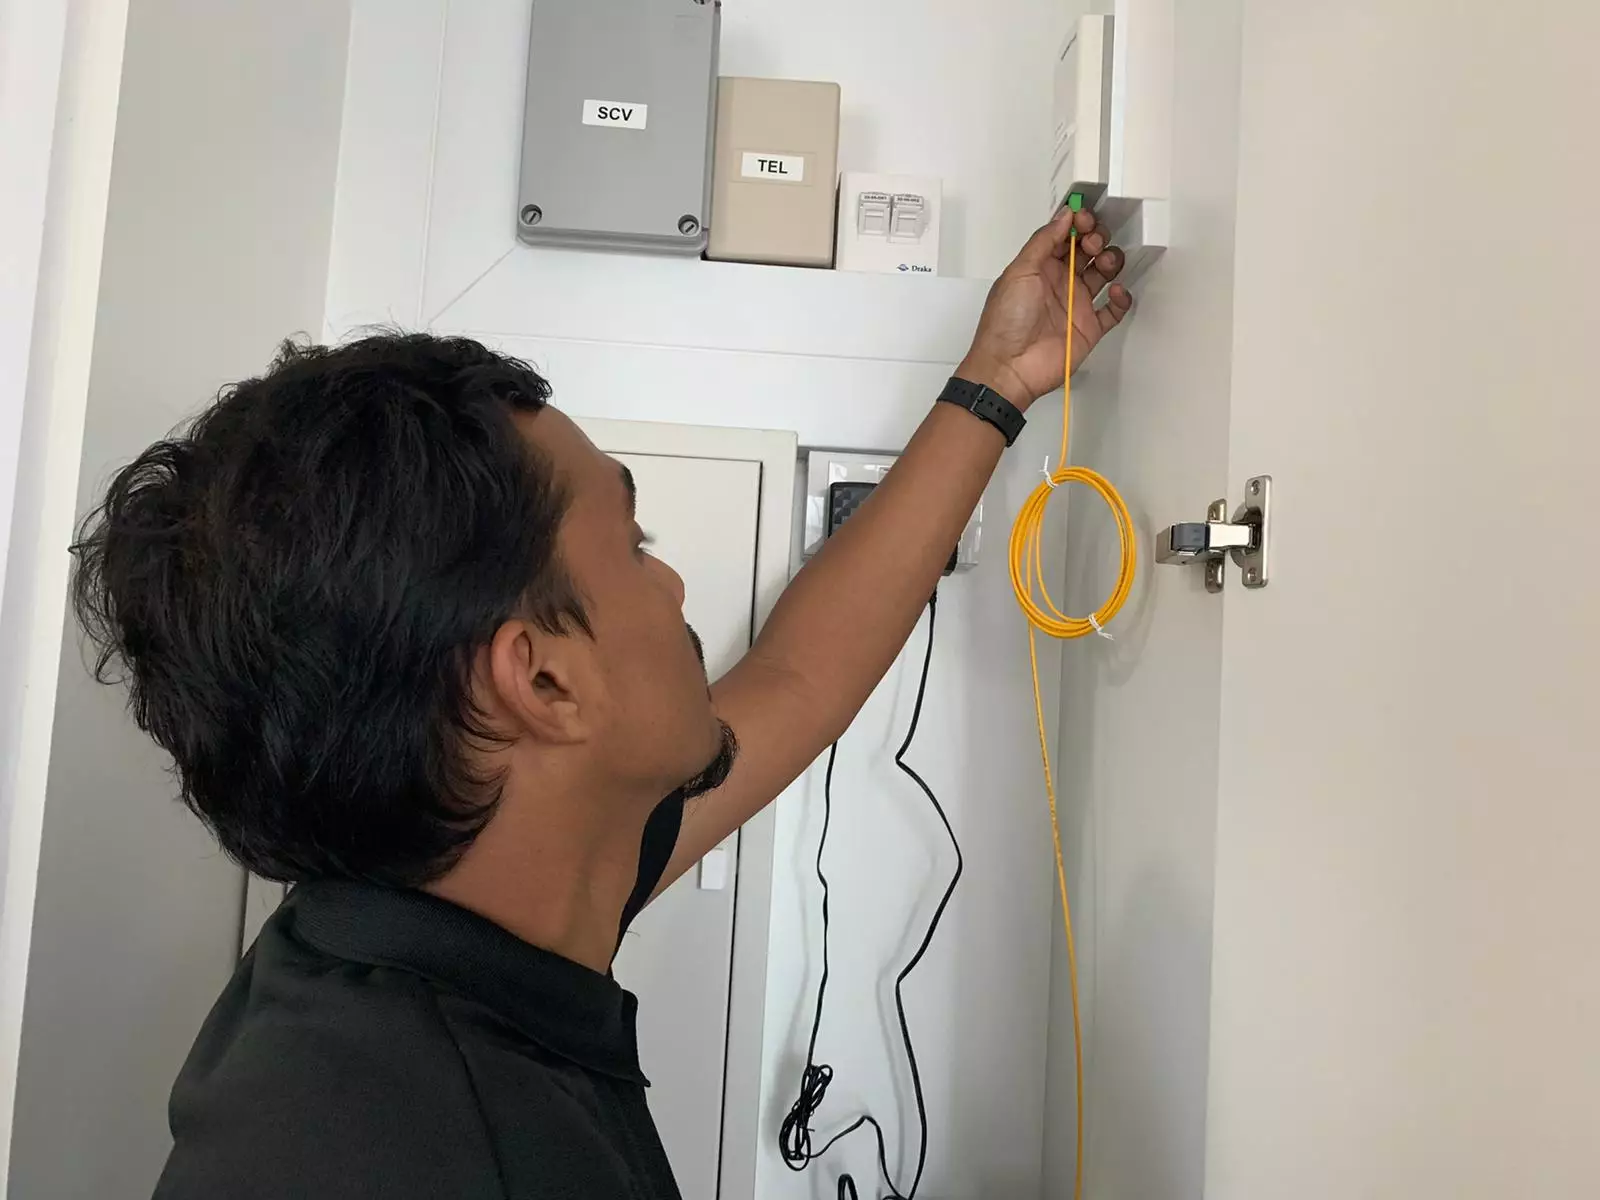 installing internet connection